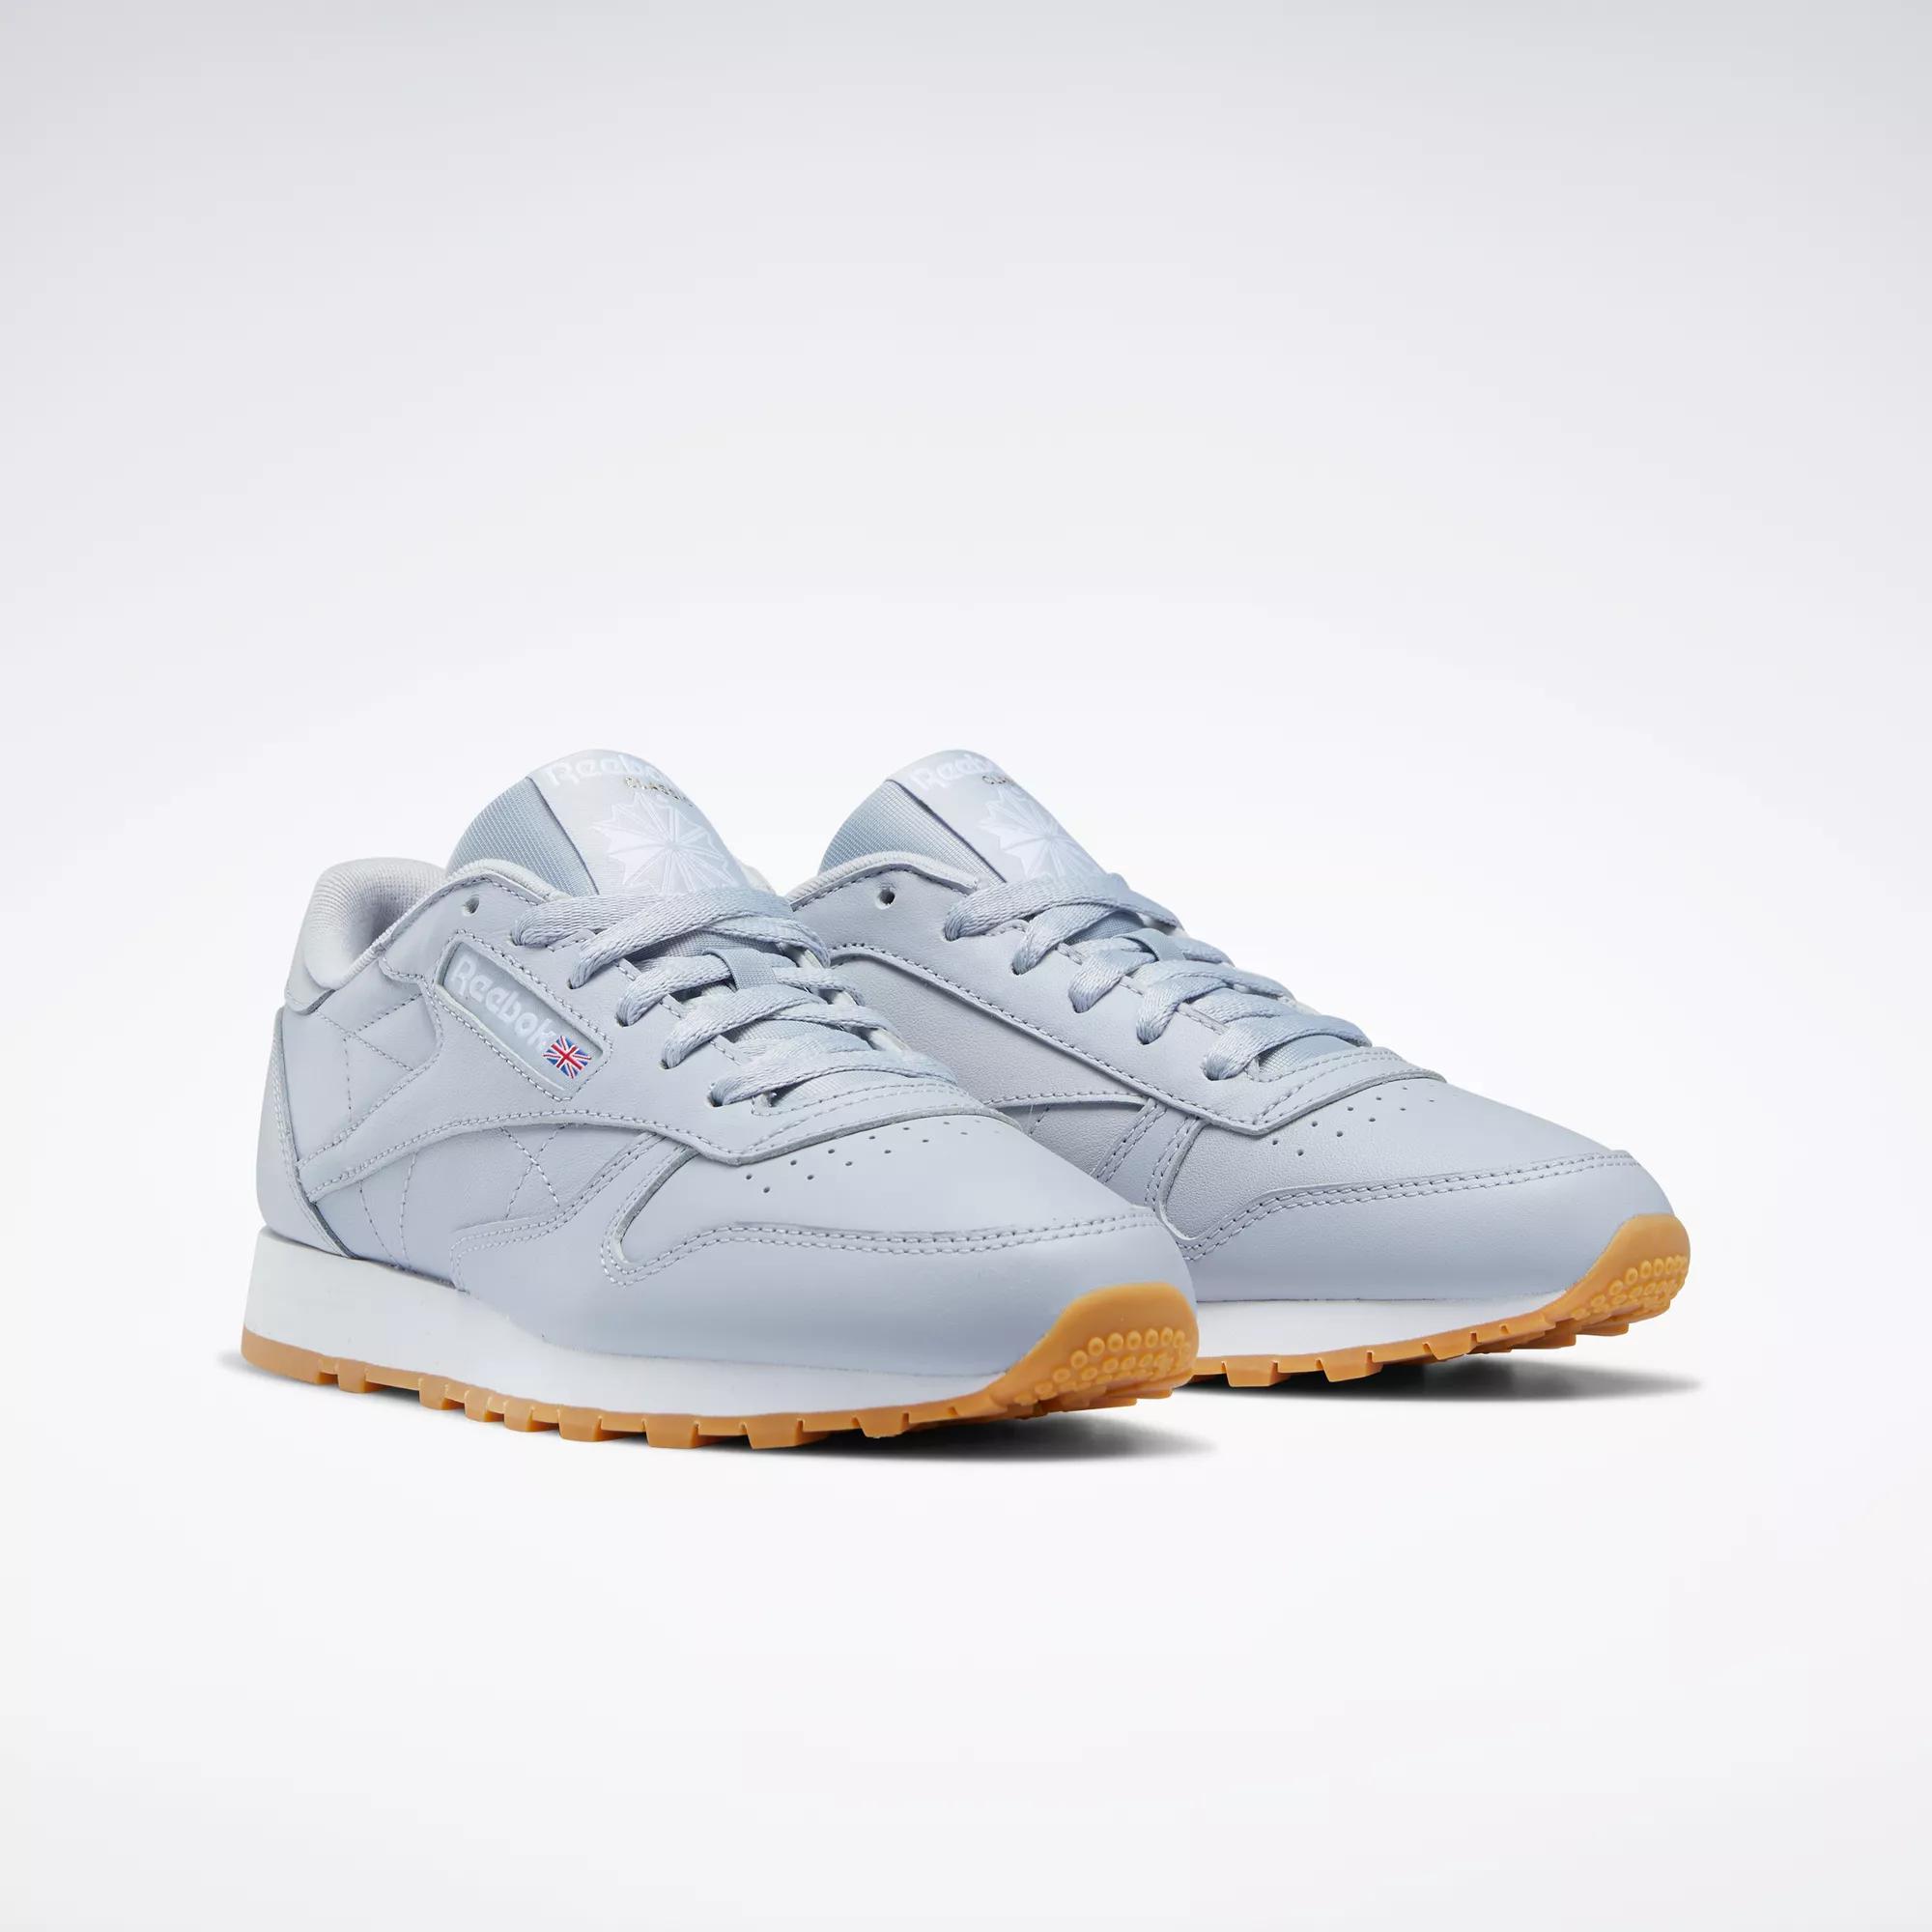 Shoes - Cold Grey 2 / Cold Grey 2 / White | Reebok